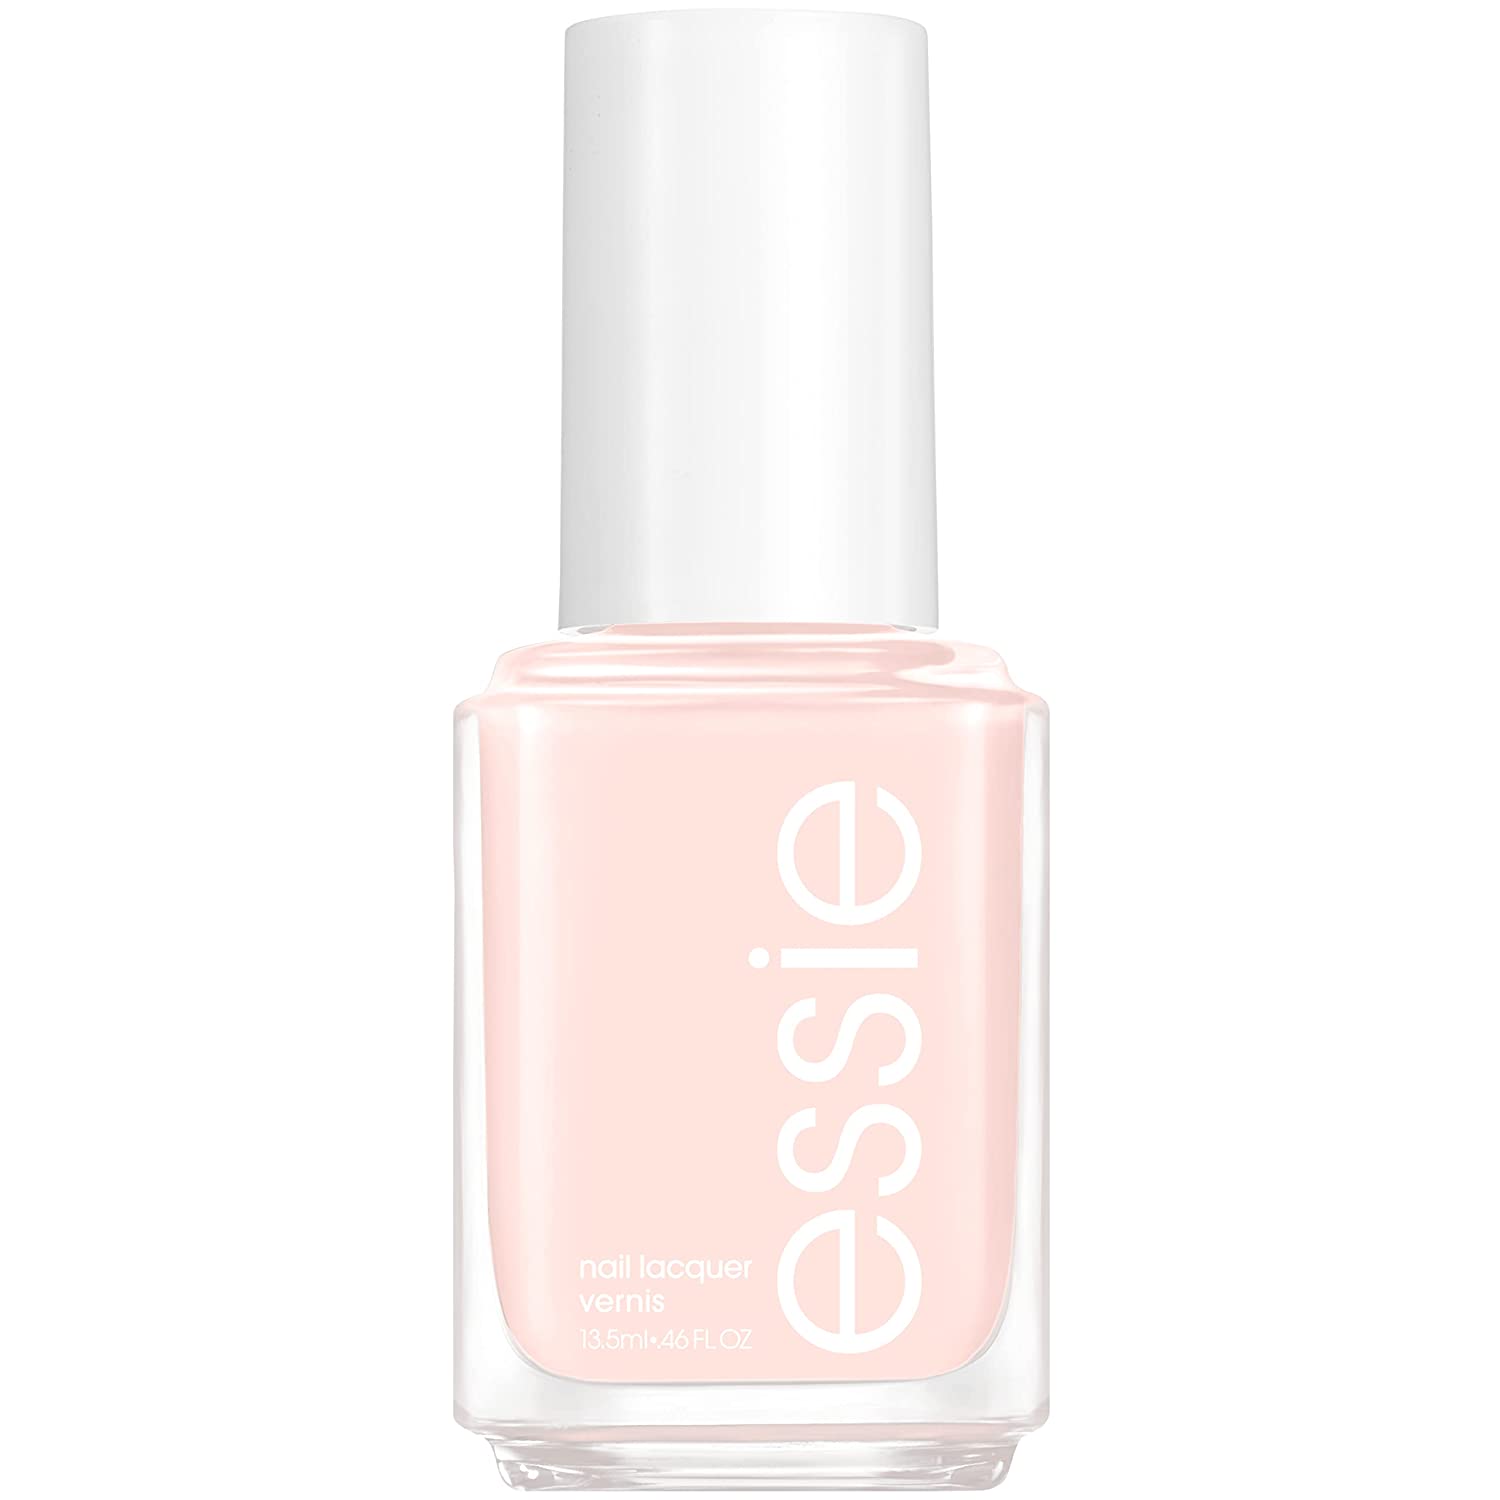 Essie polish in the shade Ballet Slippers